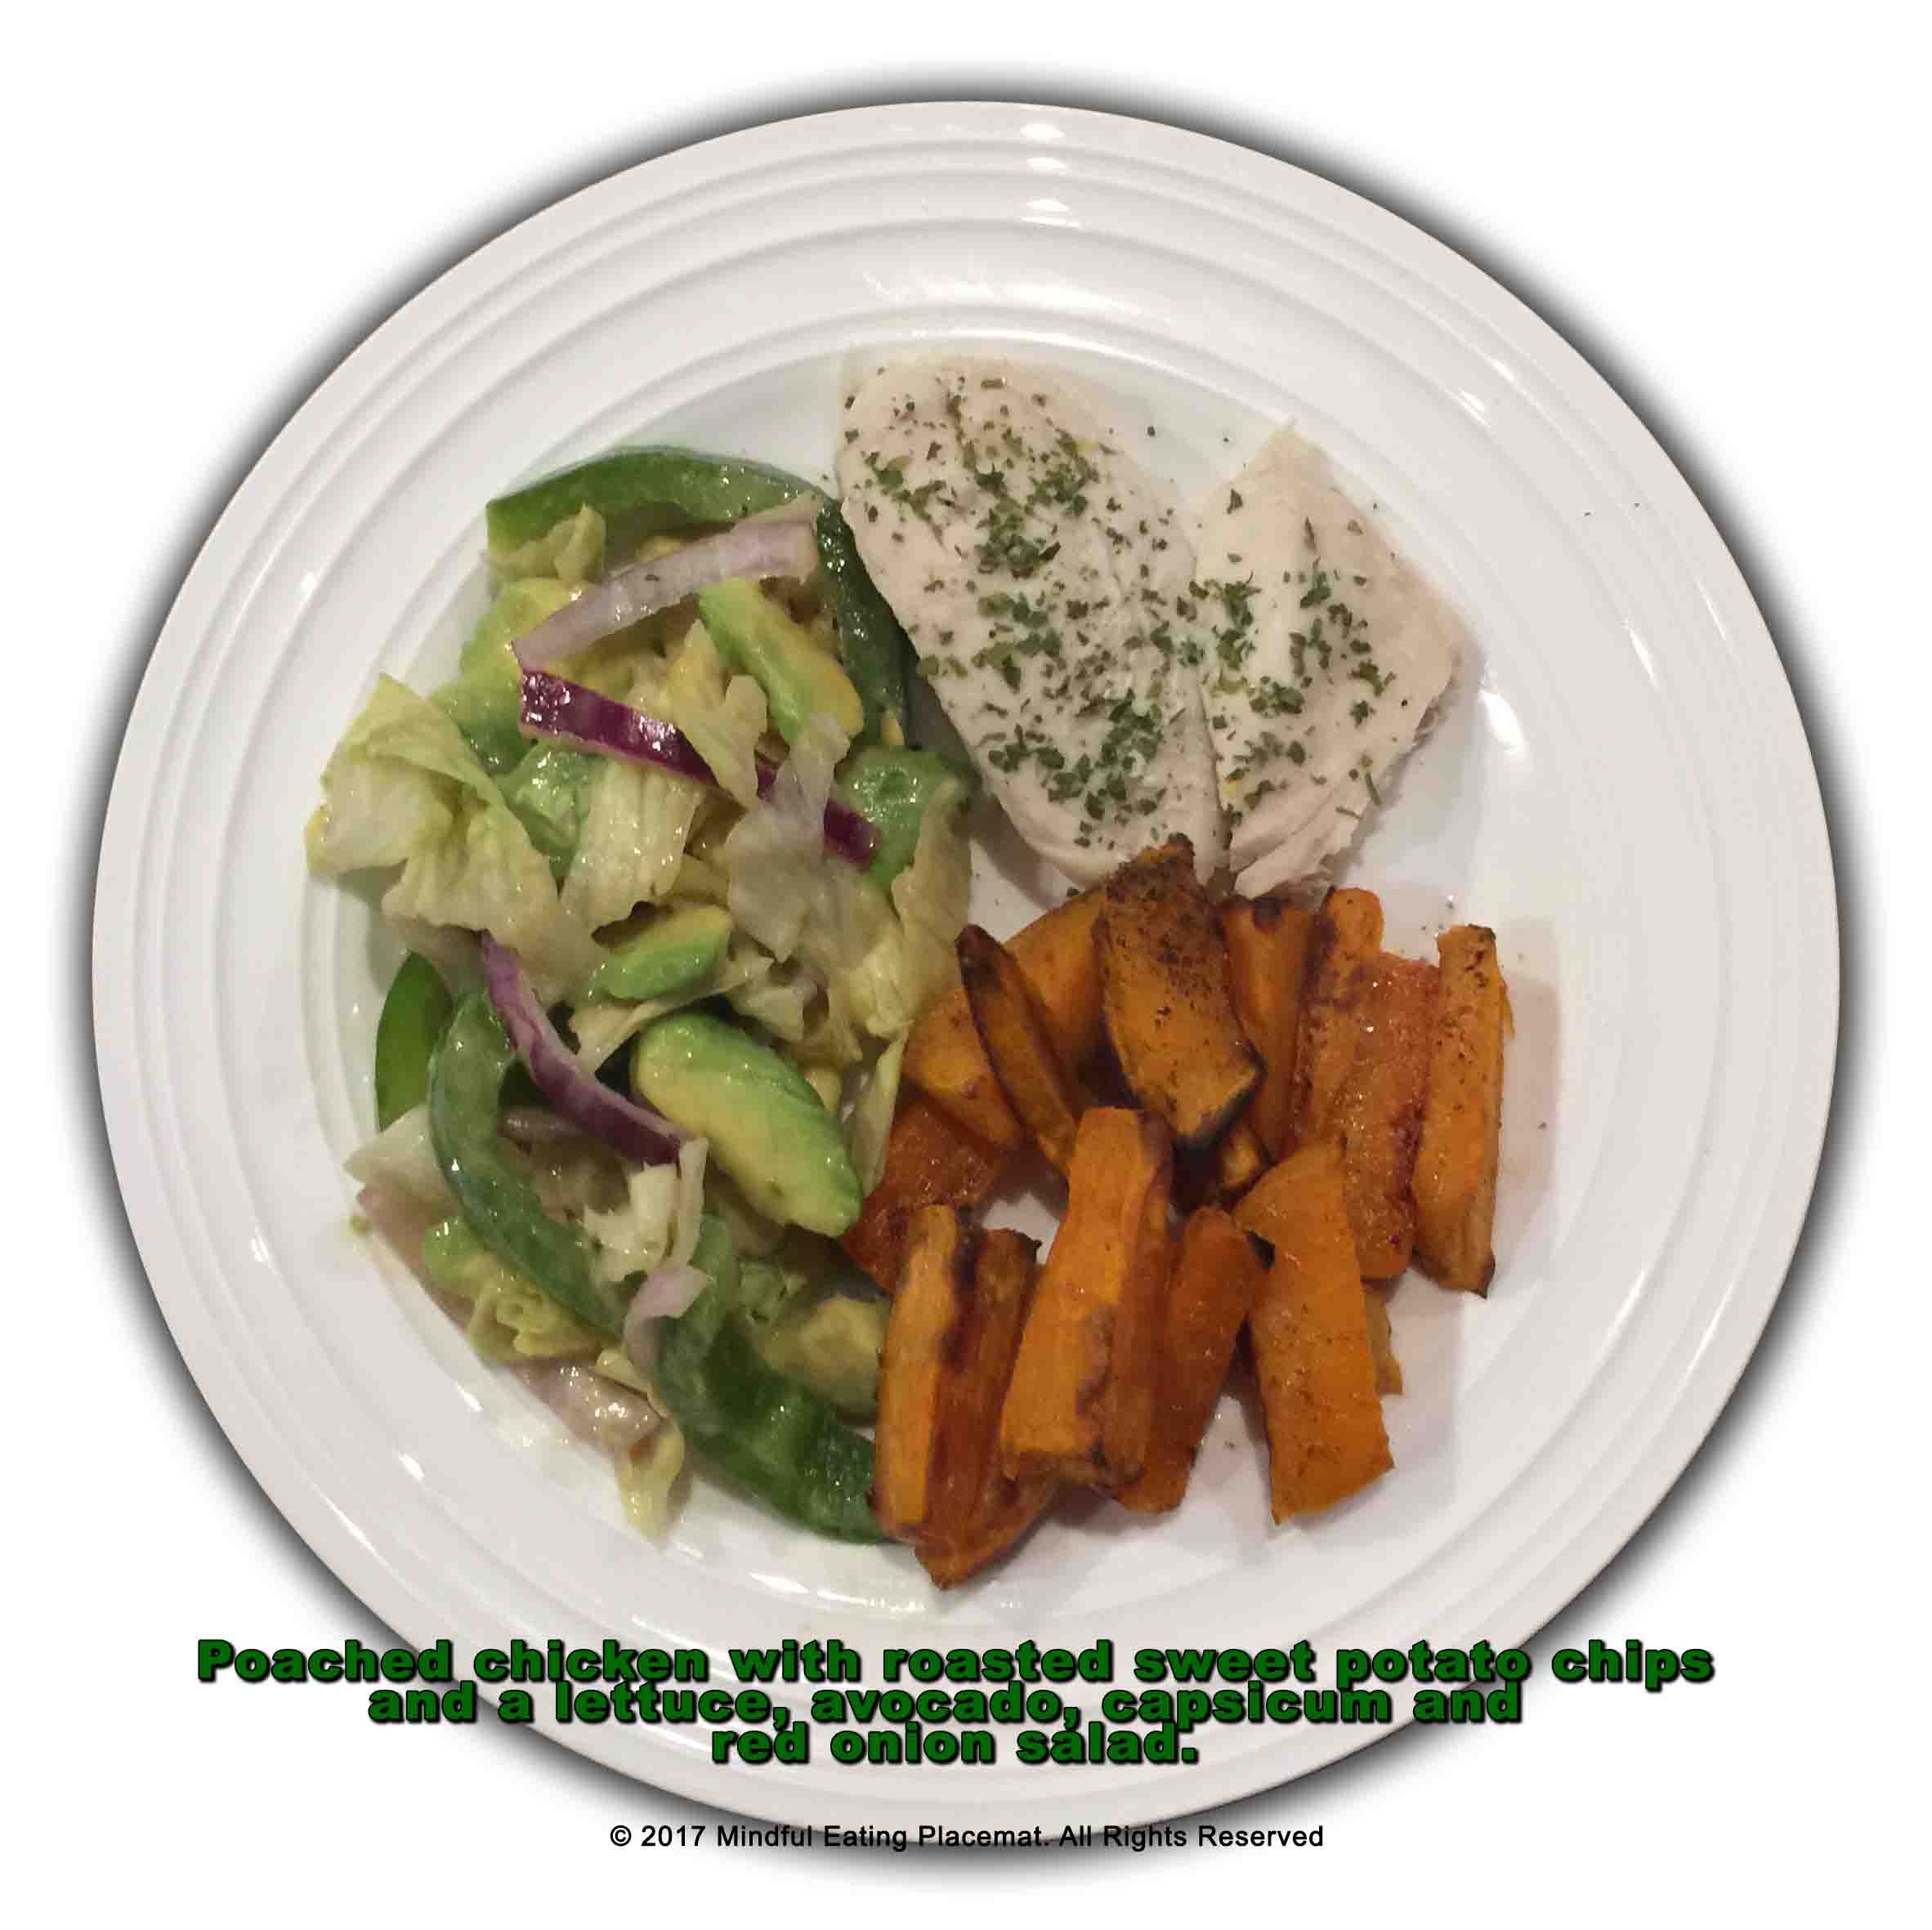 Poached chicken with oven baked sweet potato fries and green salad